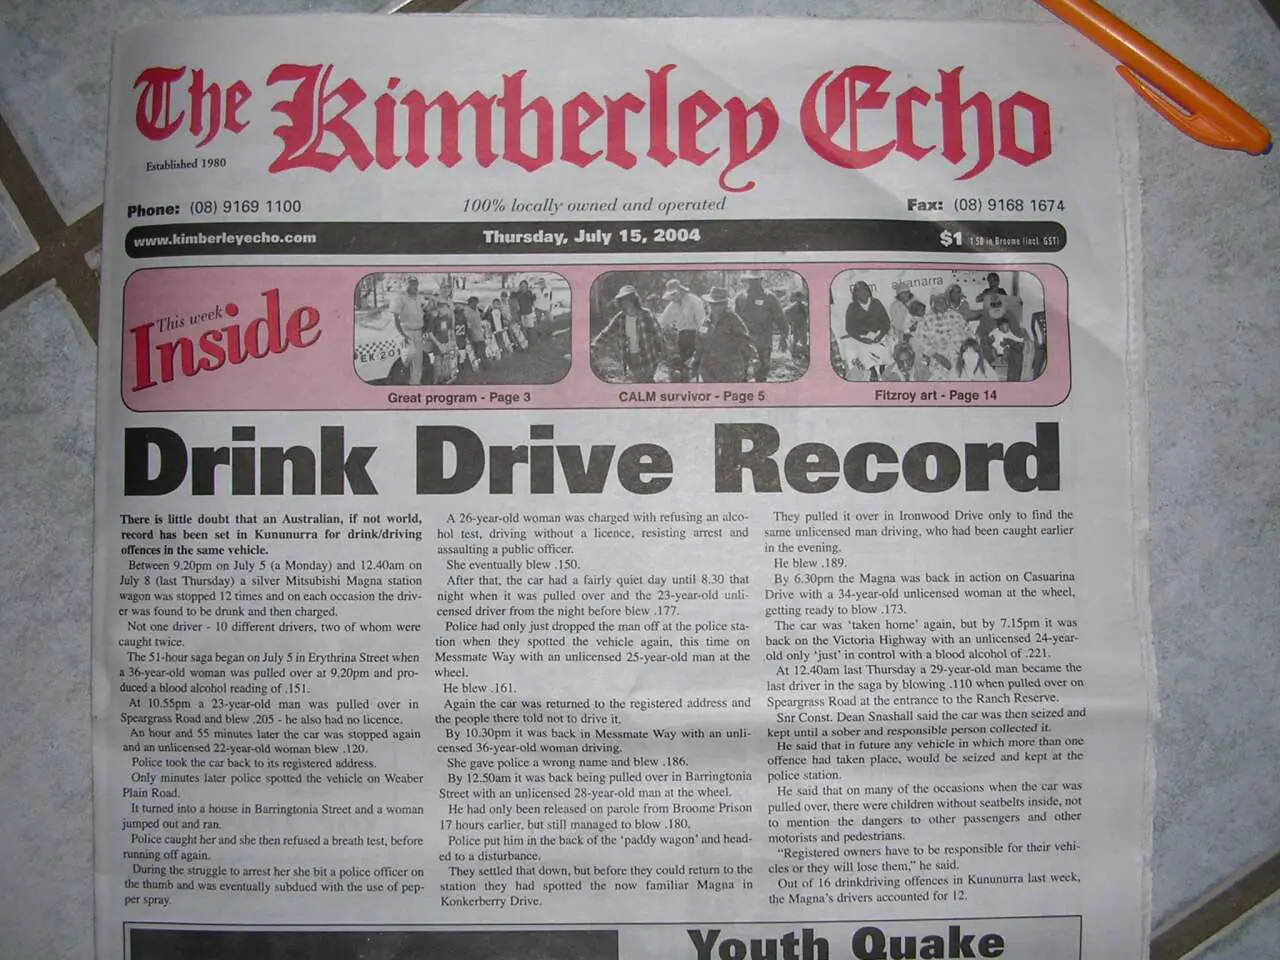 Dui Drink Driving Record | Australia Travel Blog | Driving Under The Influence (Dui) -The Drink Driving Record! | Australia Travel Blog | Author: Anthony Bianco - The Travel Tart Blog